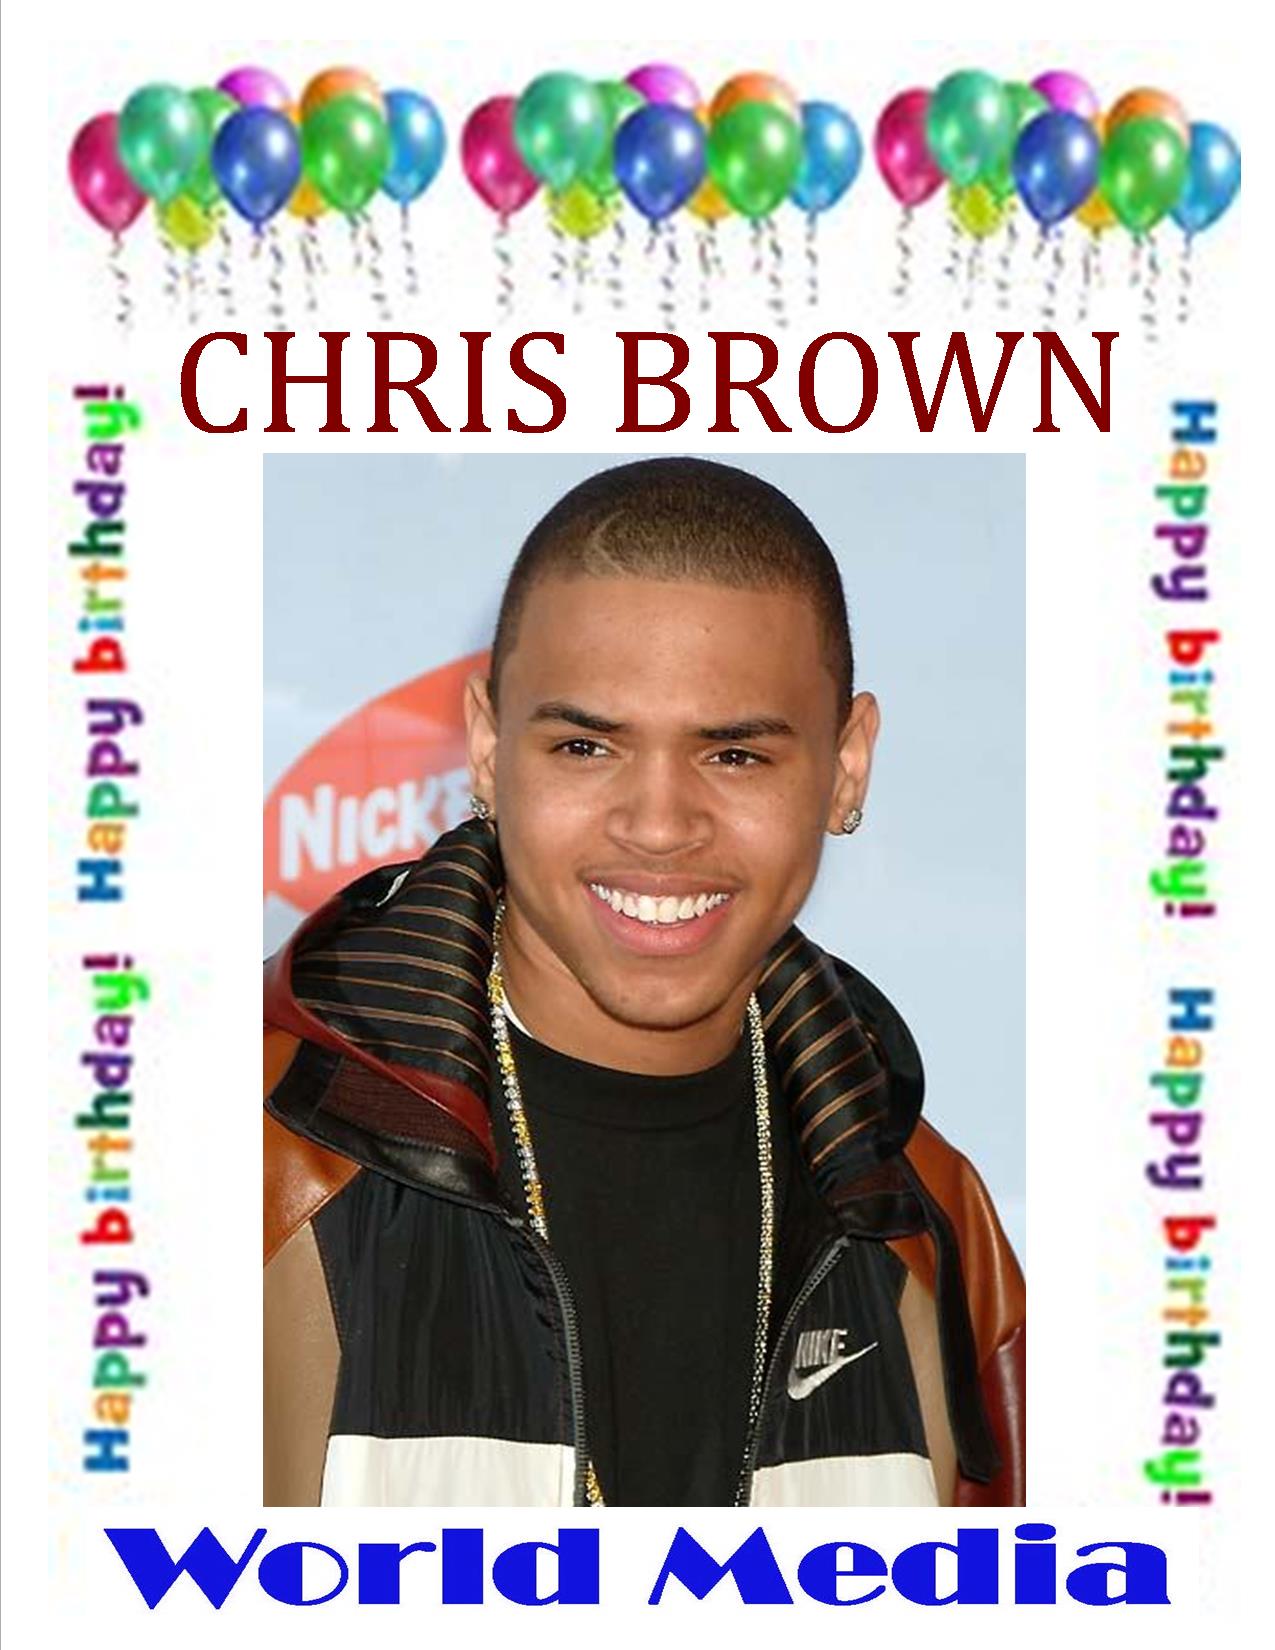 LET\S ALL WISH CHRIS BROWN HAPPY BIRTHDAY 